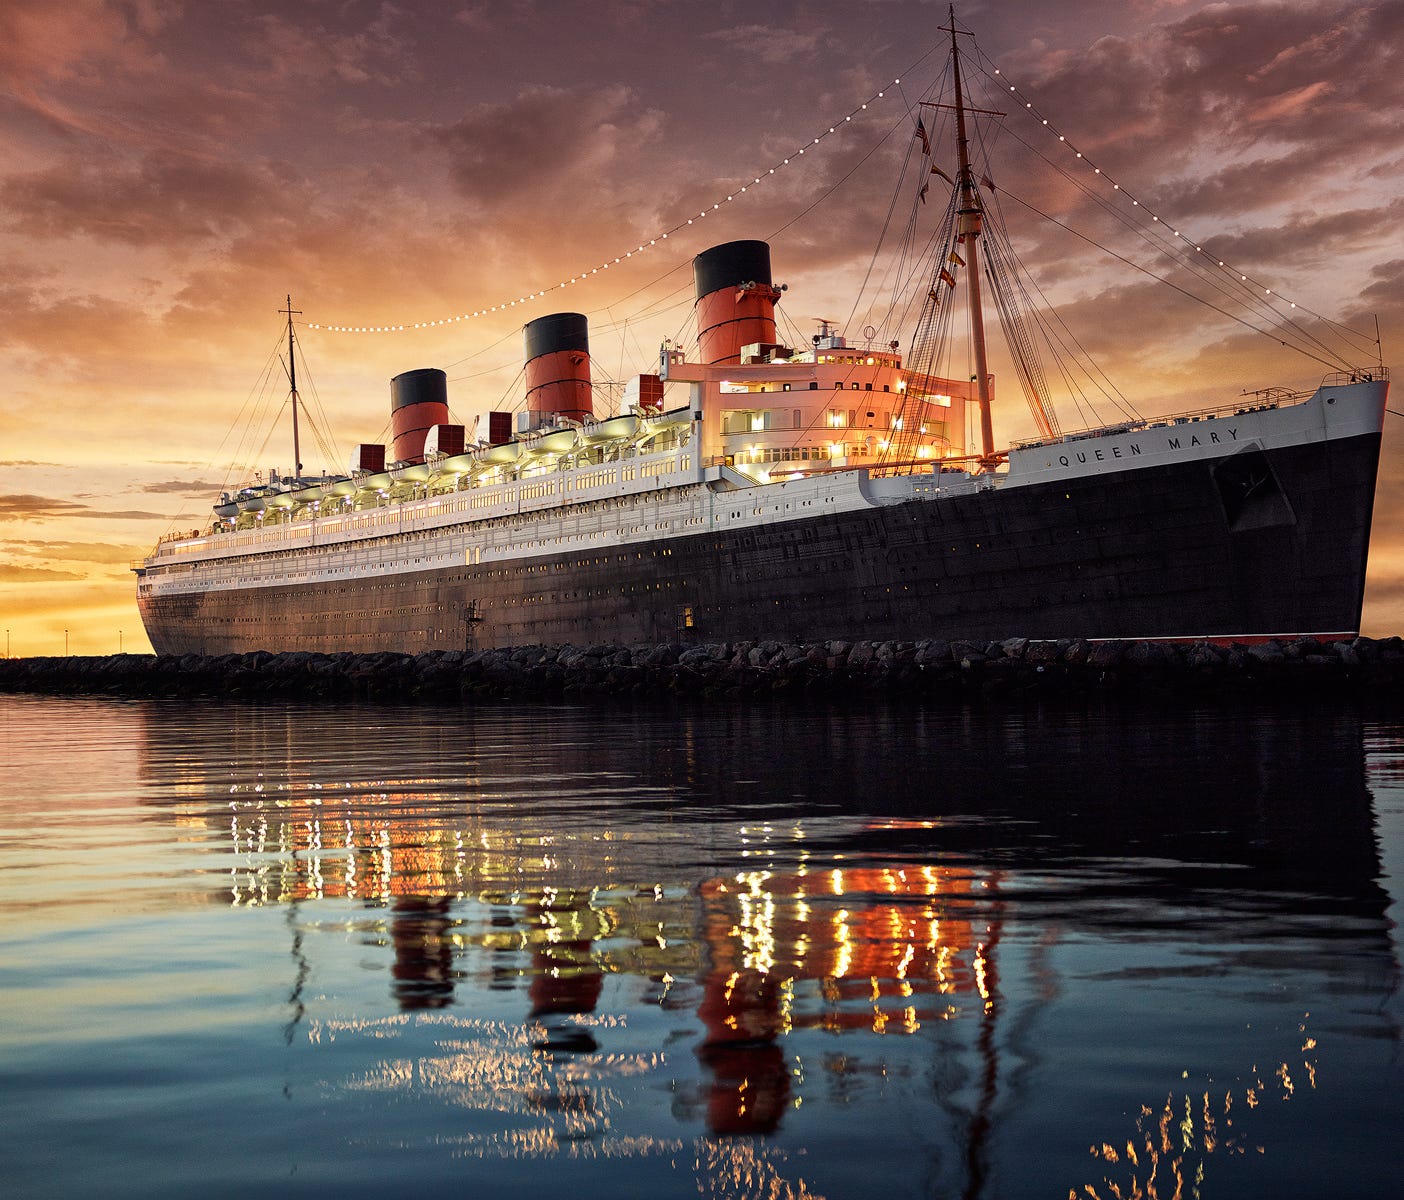 Unveiled in 1936, the Queen Mary is one of the most famous ocean liners of the 20th century. It last sailed in 1967 and is now a floating museum and hotel in Long Beach, Calif.